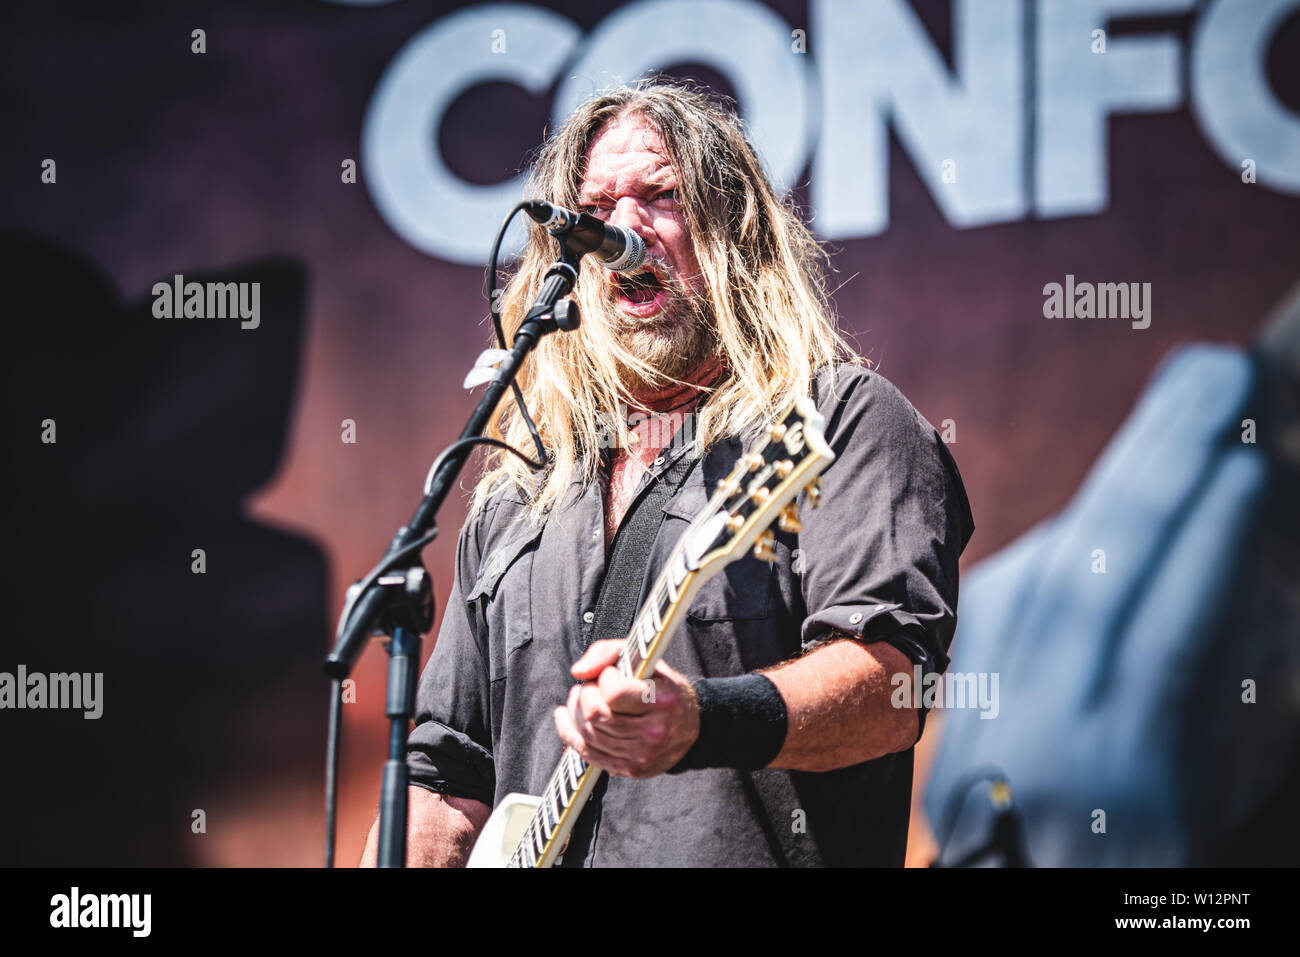 Pepper Keenan, guitarist and singer of the American heavy metal band Corrosion Of Conformity, performing live on stage in Bologna, at the Bologna Soni Stock Photo